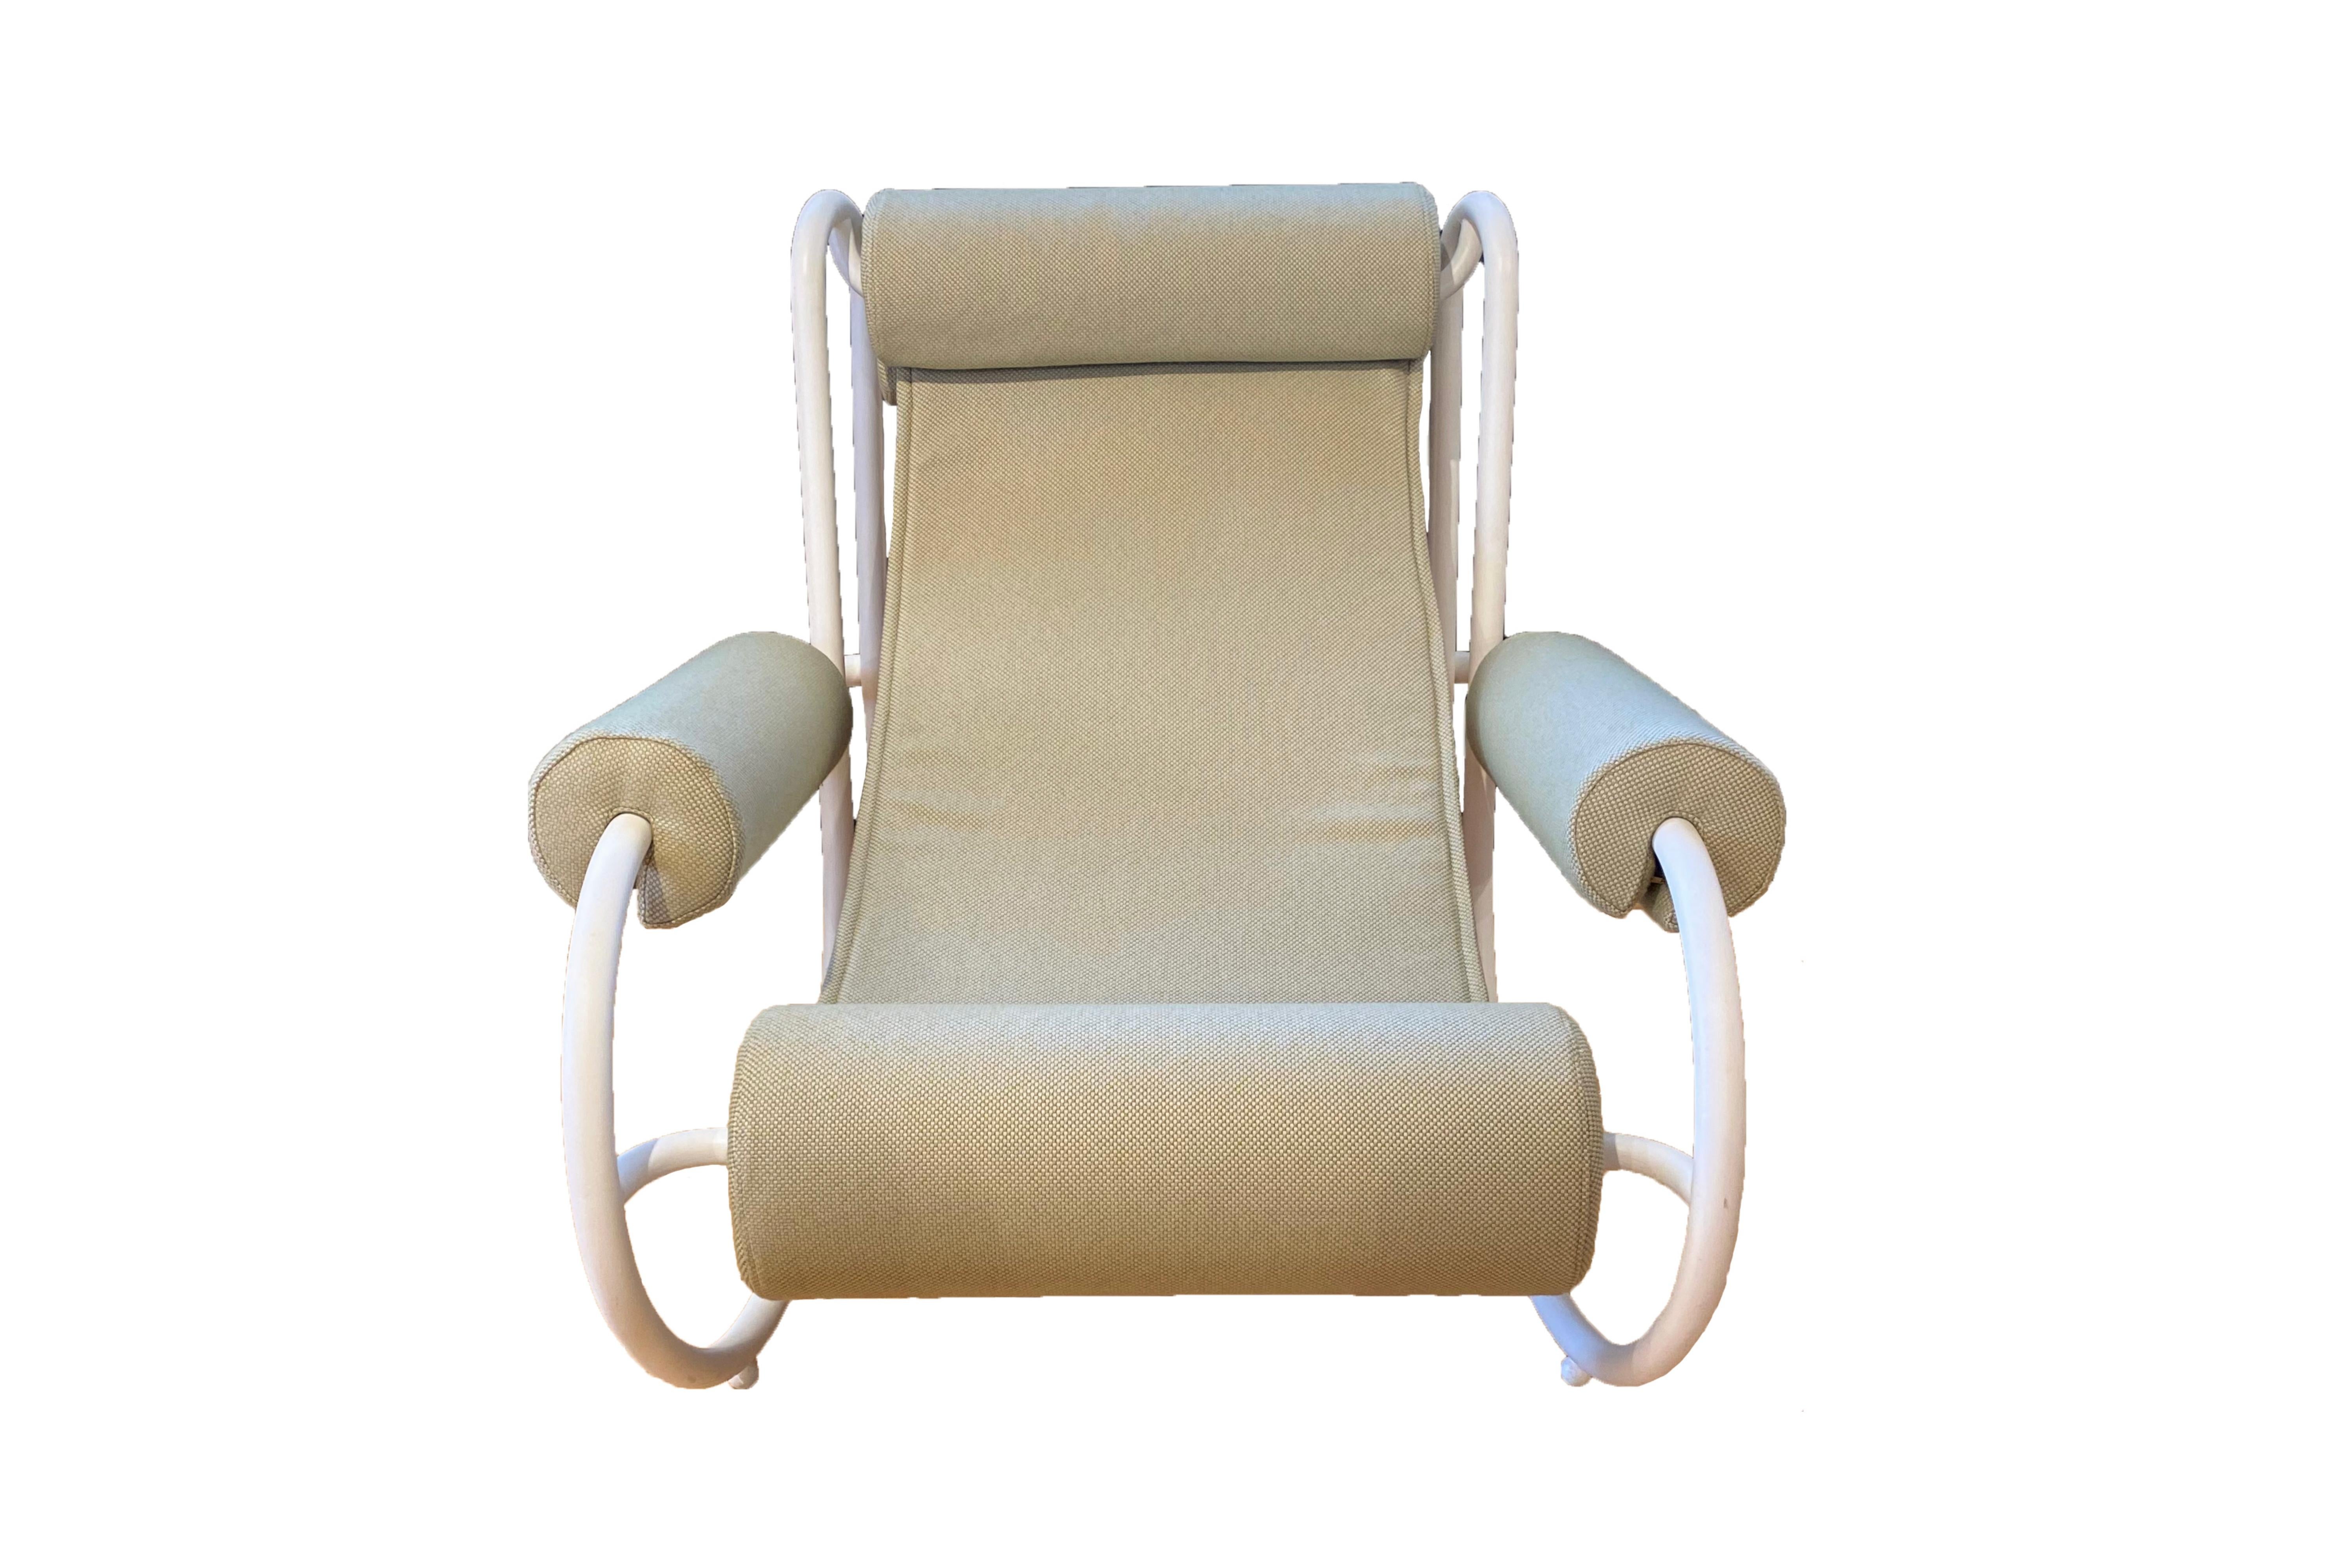 Gae Aulenti (1927-2012), 
Pair of armchairs, 
Designed in 1964, vintage edition,
White lacquered metal and stretched fabric 
Reupholstered,
Italy, circa 1960.

Measures: Height 84 cm, seat height 38 cm, depth 110 cm, width 85cm.

Gae